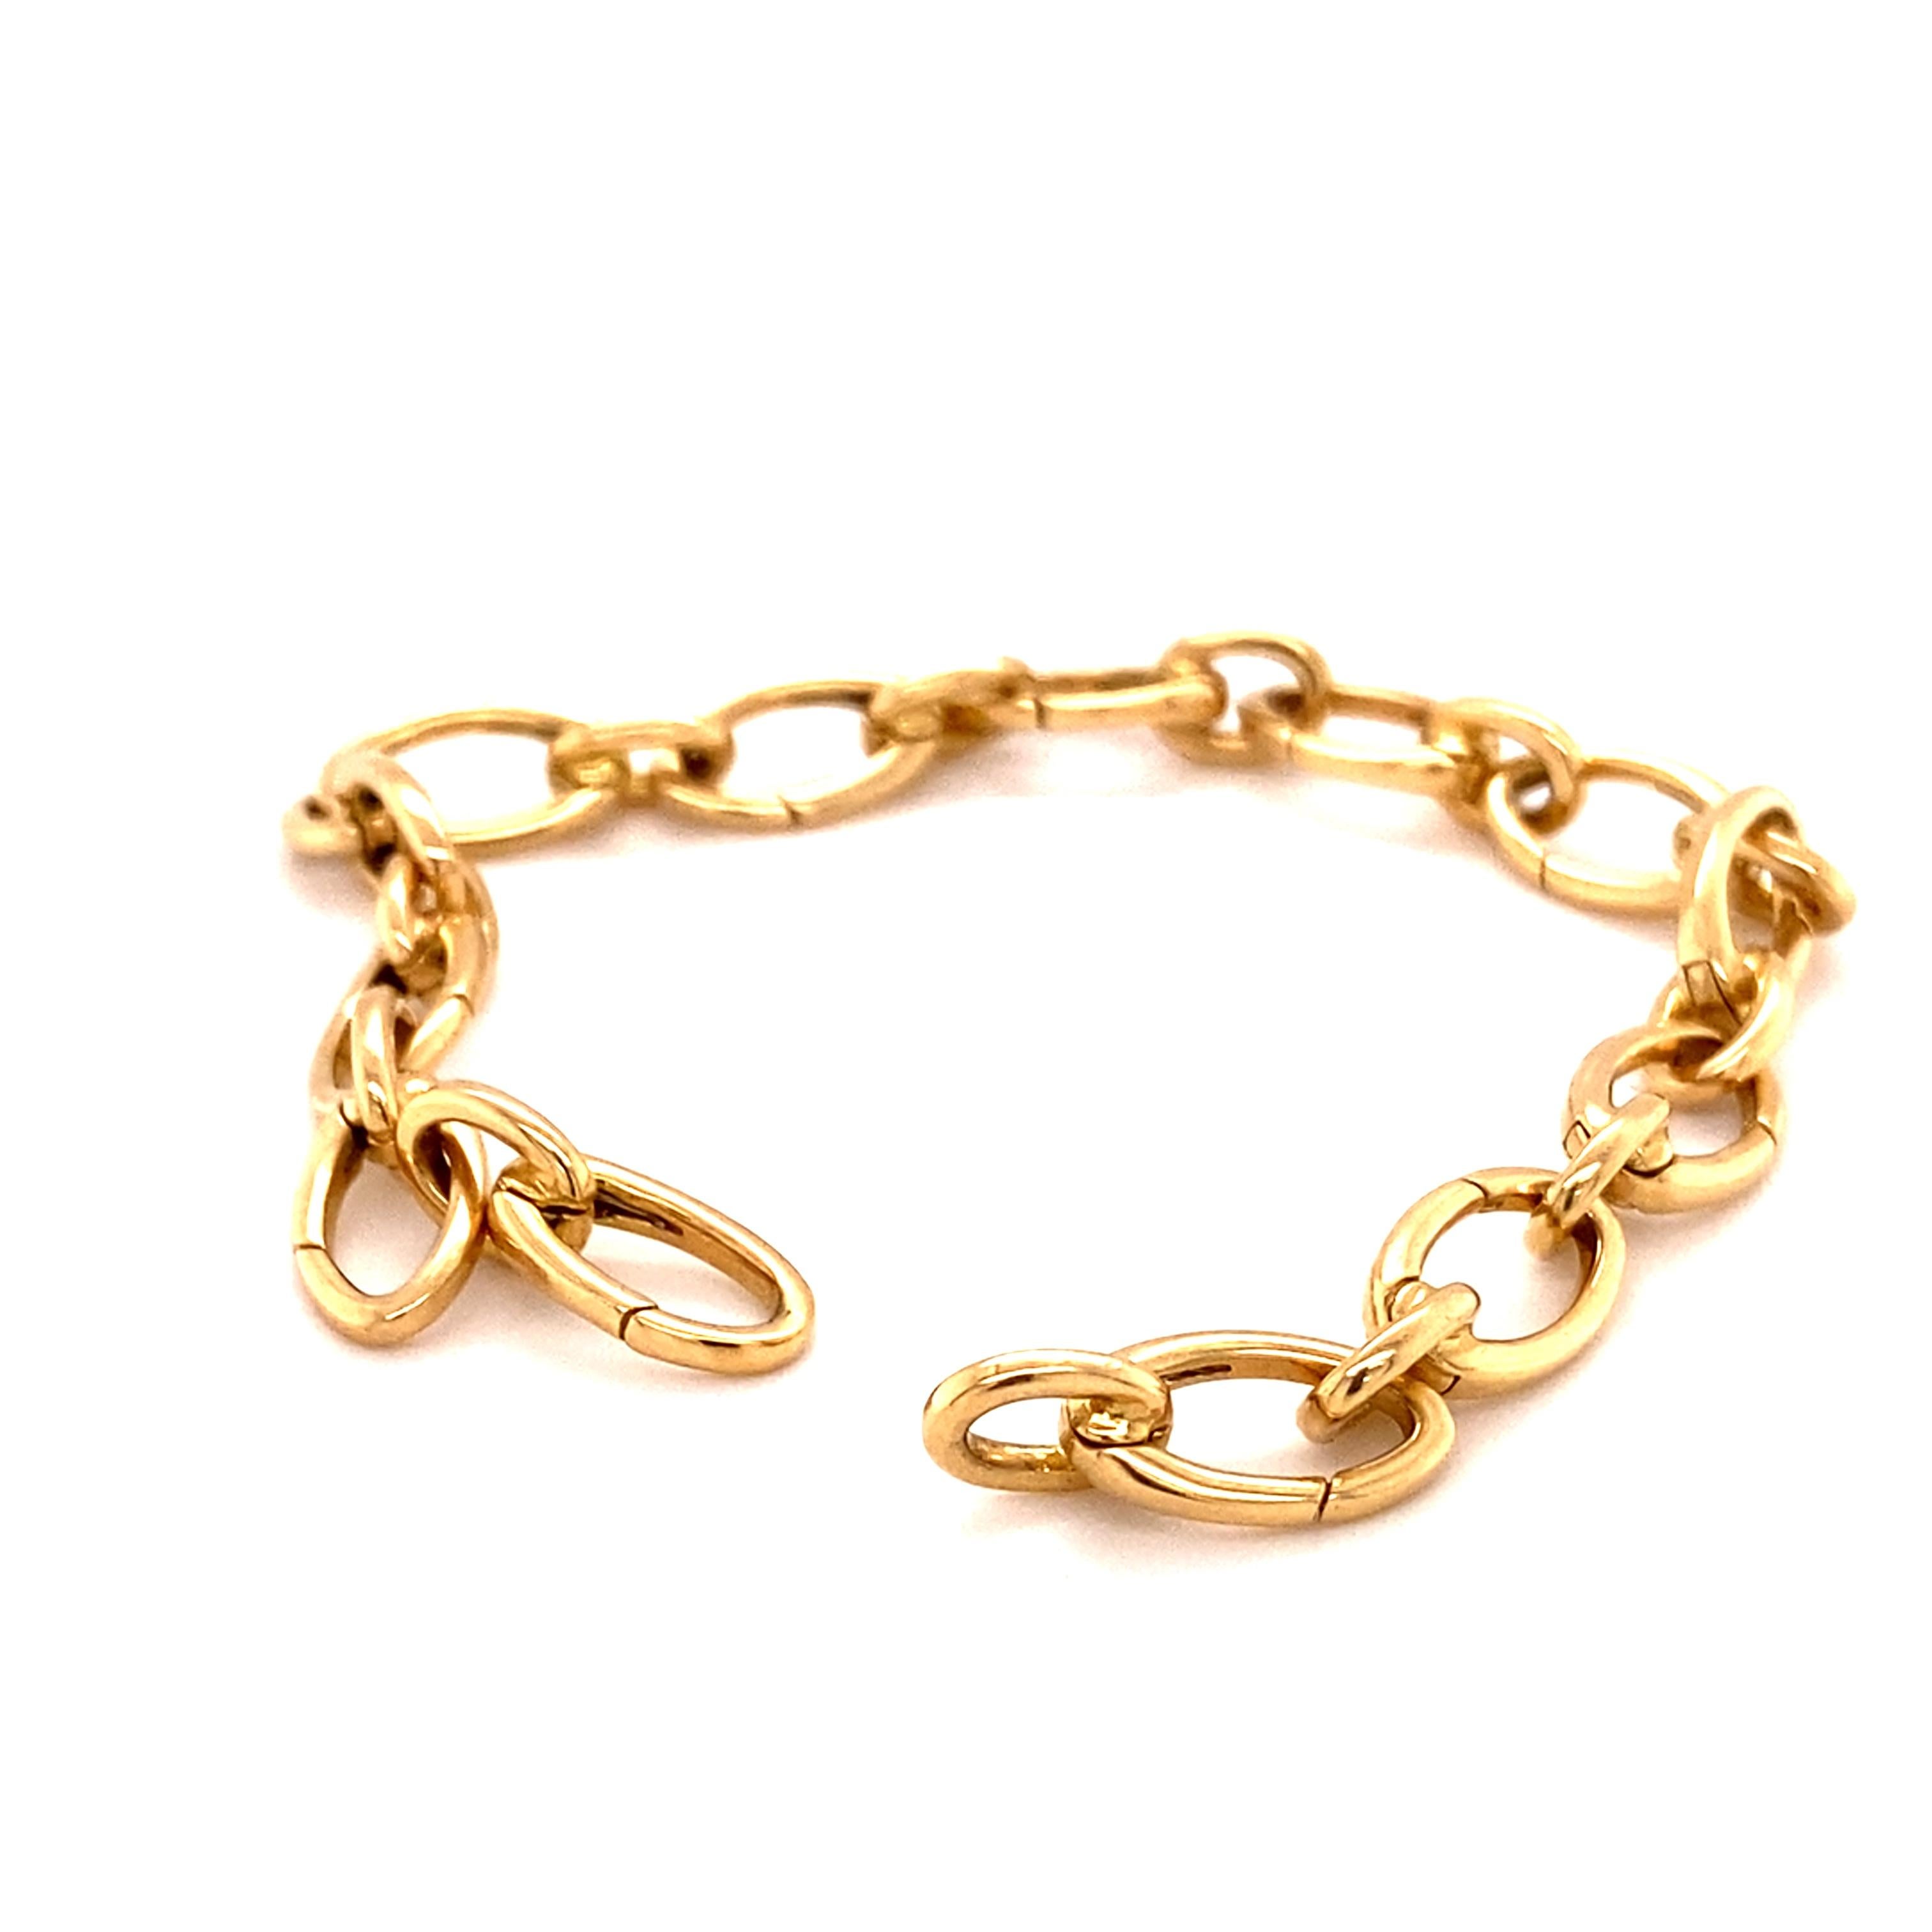 Item Details:
Designer: Tiffany and Co.
Length: 7 inches
Metal: 18 karat Yellow Gold
Weight: 16.4 grams
Hallmark: T&CO. 750 ITALY

Item Features:
This beautiful Tiffany & Co. bracelet made in Italy in the 1990s is 18 karat yellow gold with 25 well